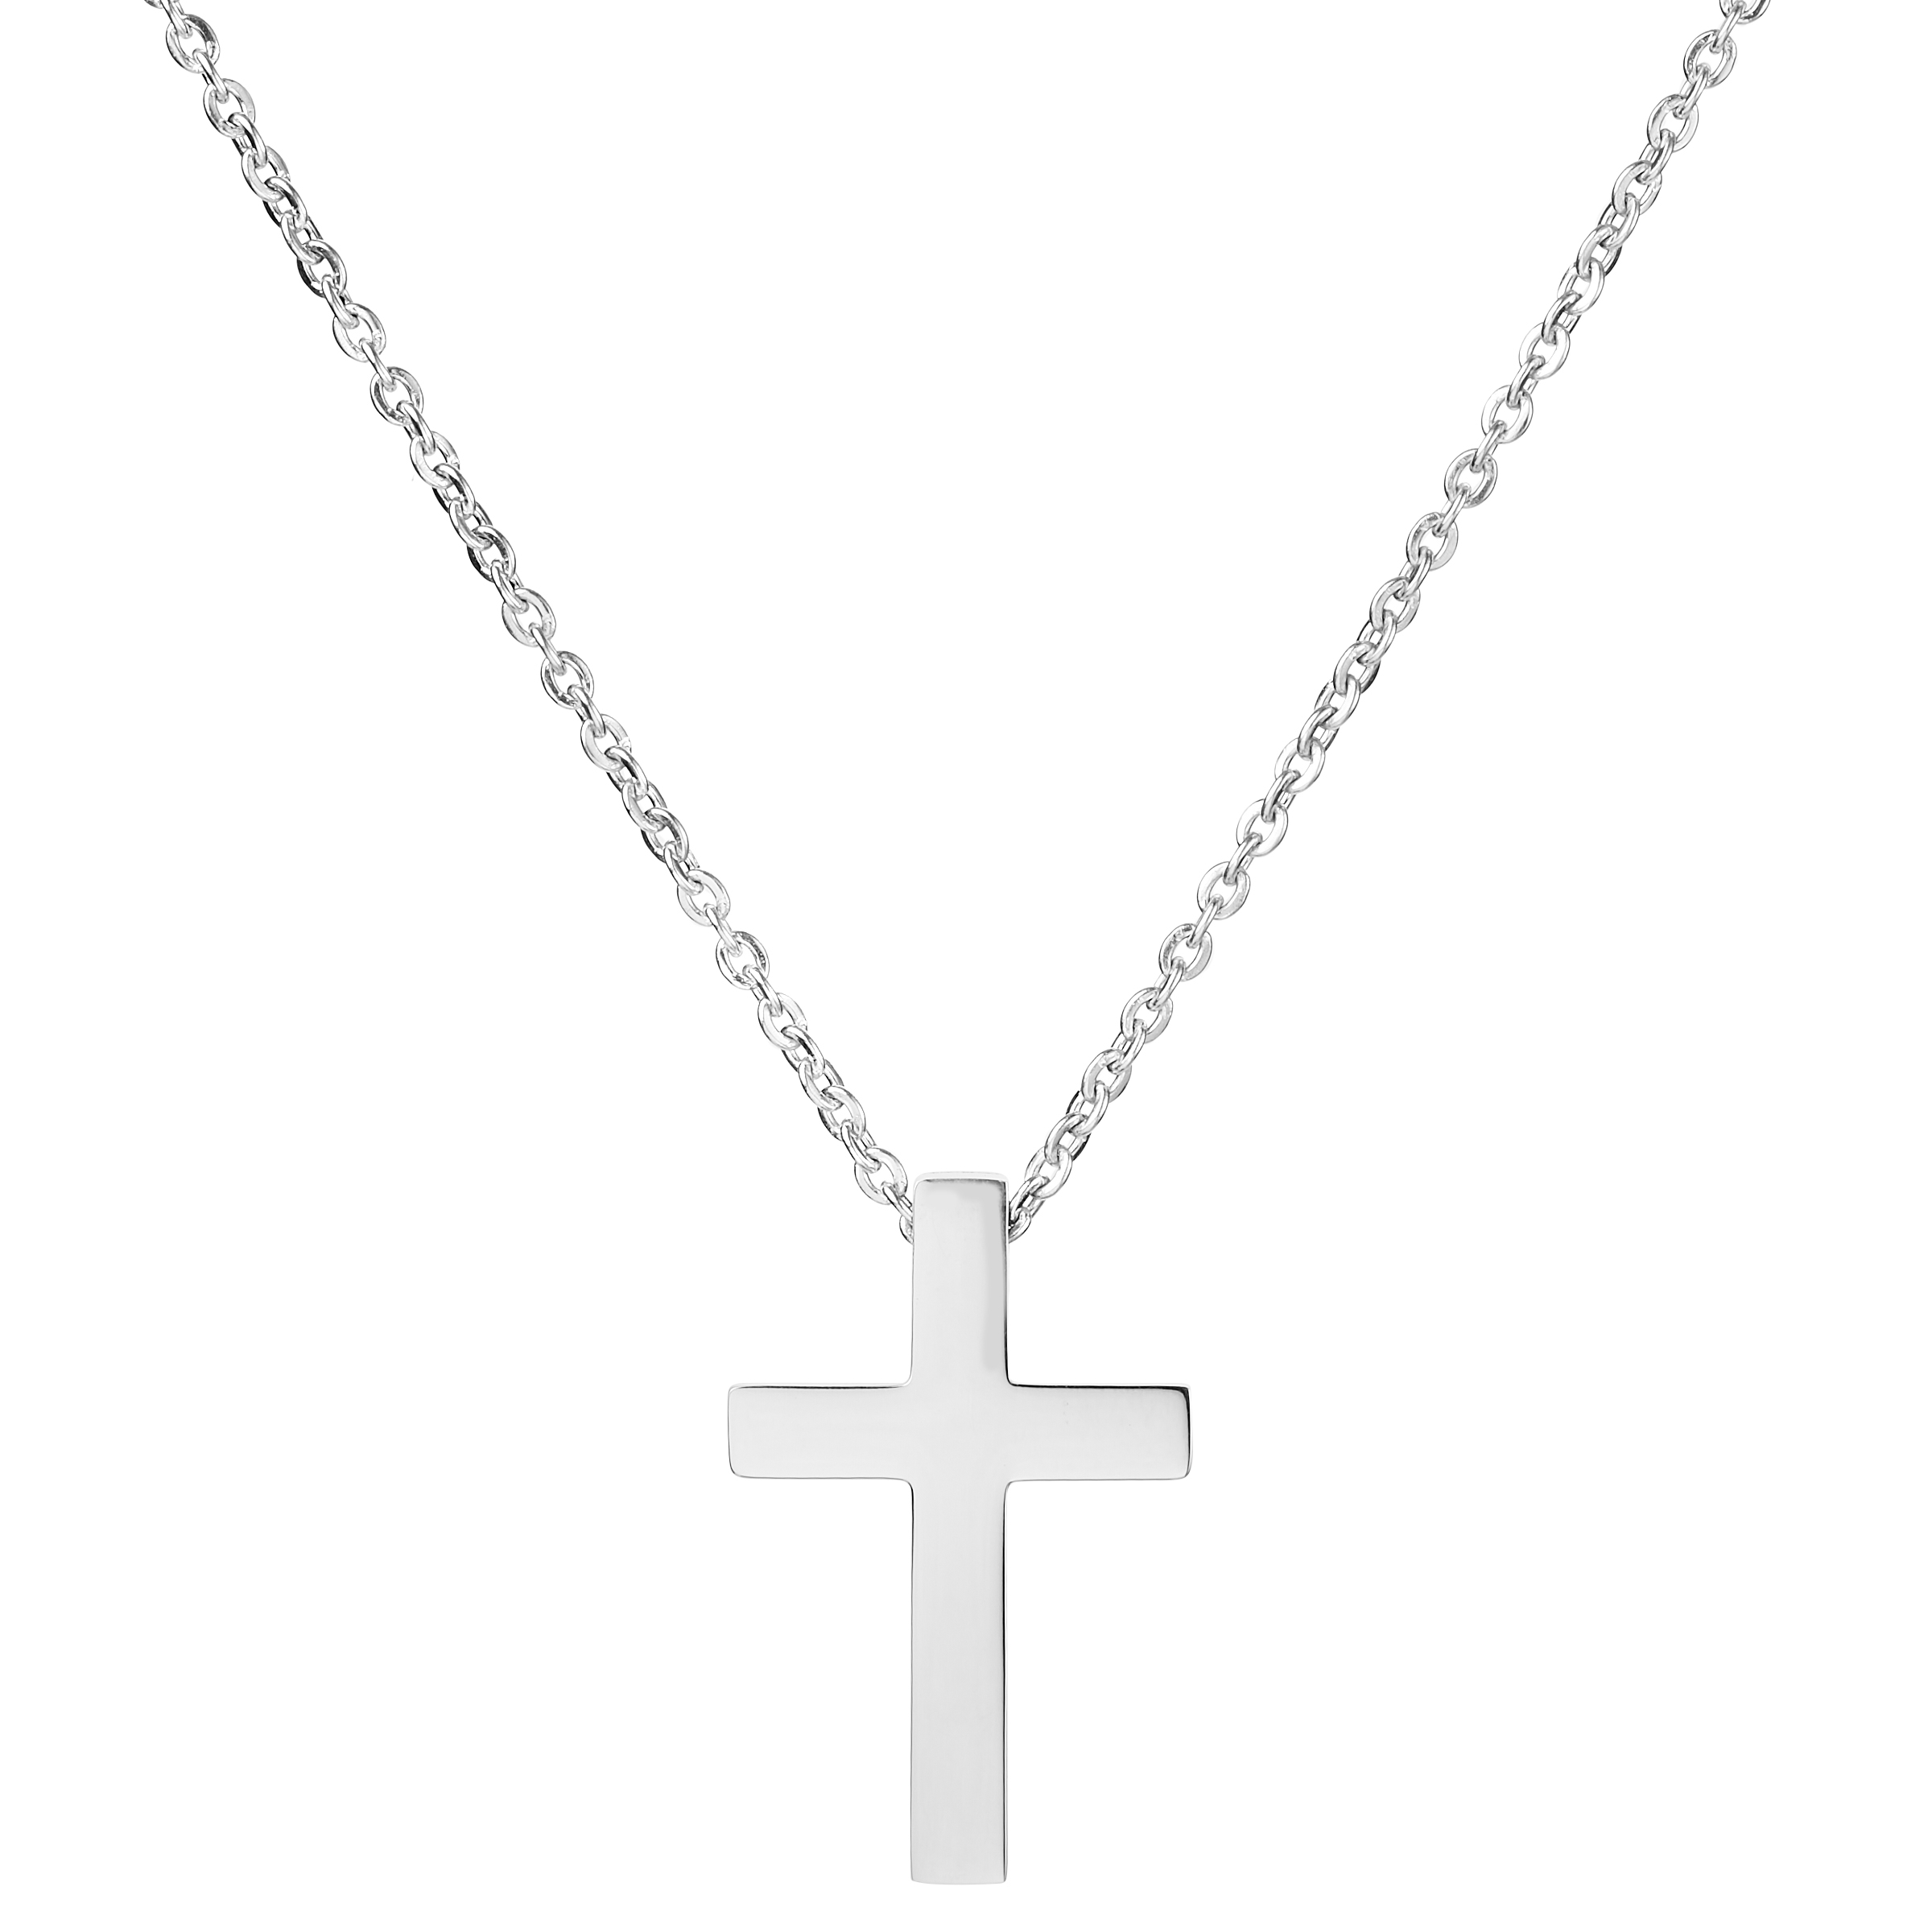 Top 20 Popular Cross Necklaces For Men Today | Men's Fashion Guide | Classy  Men Collection